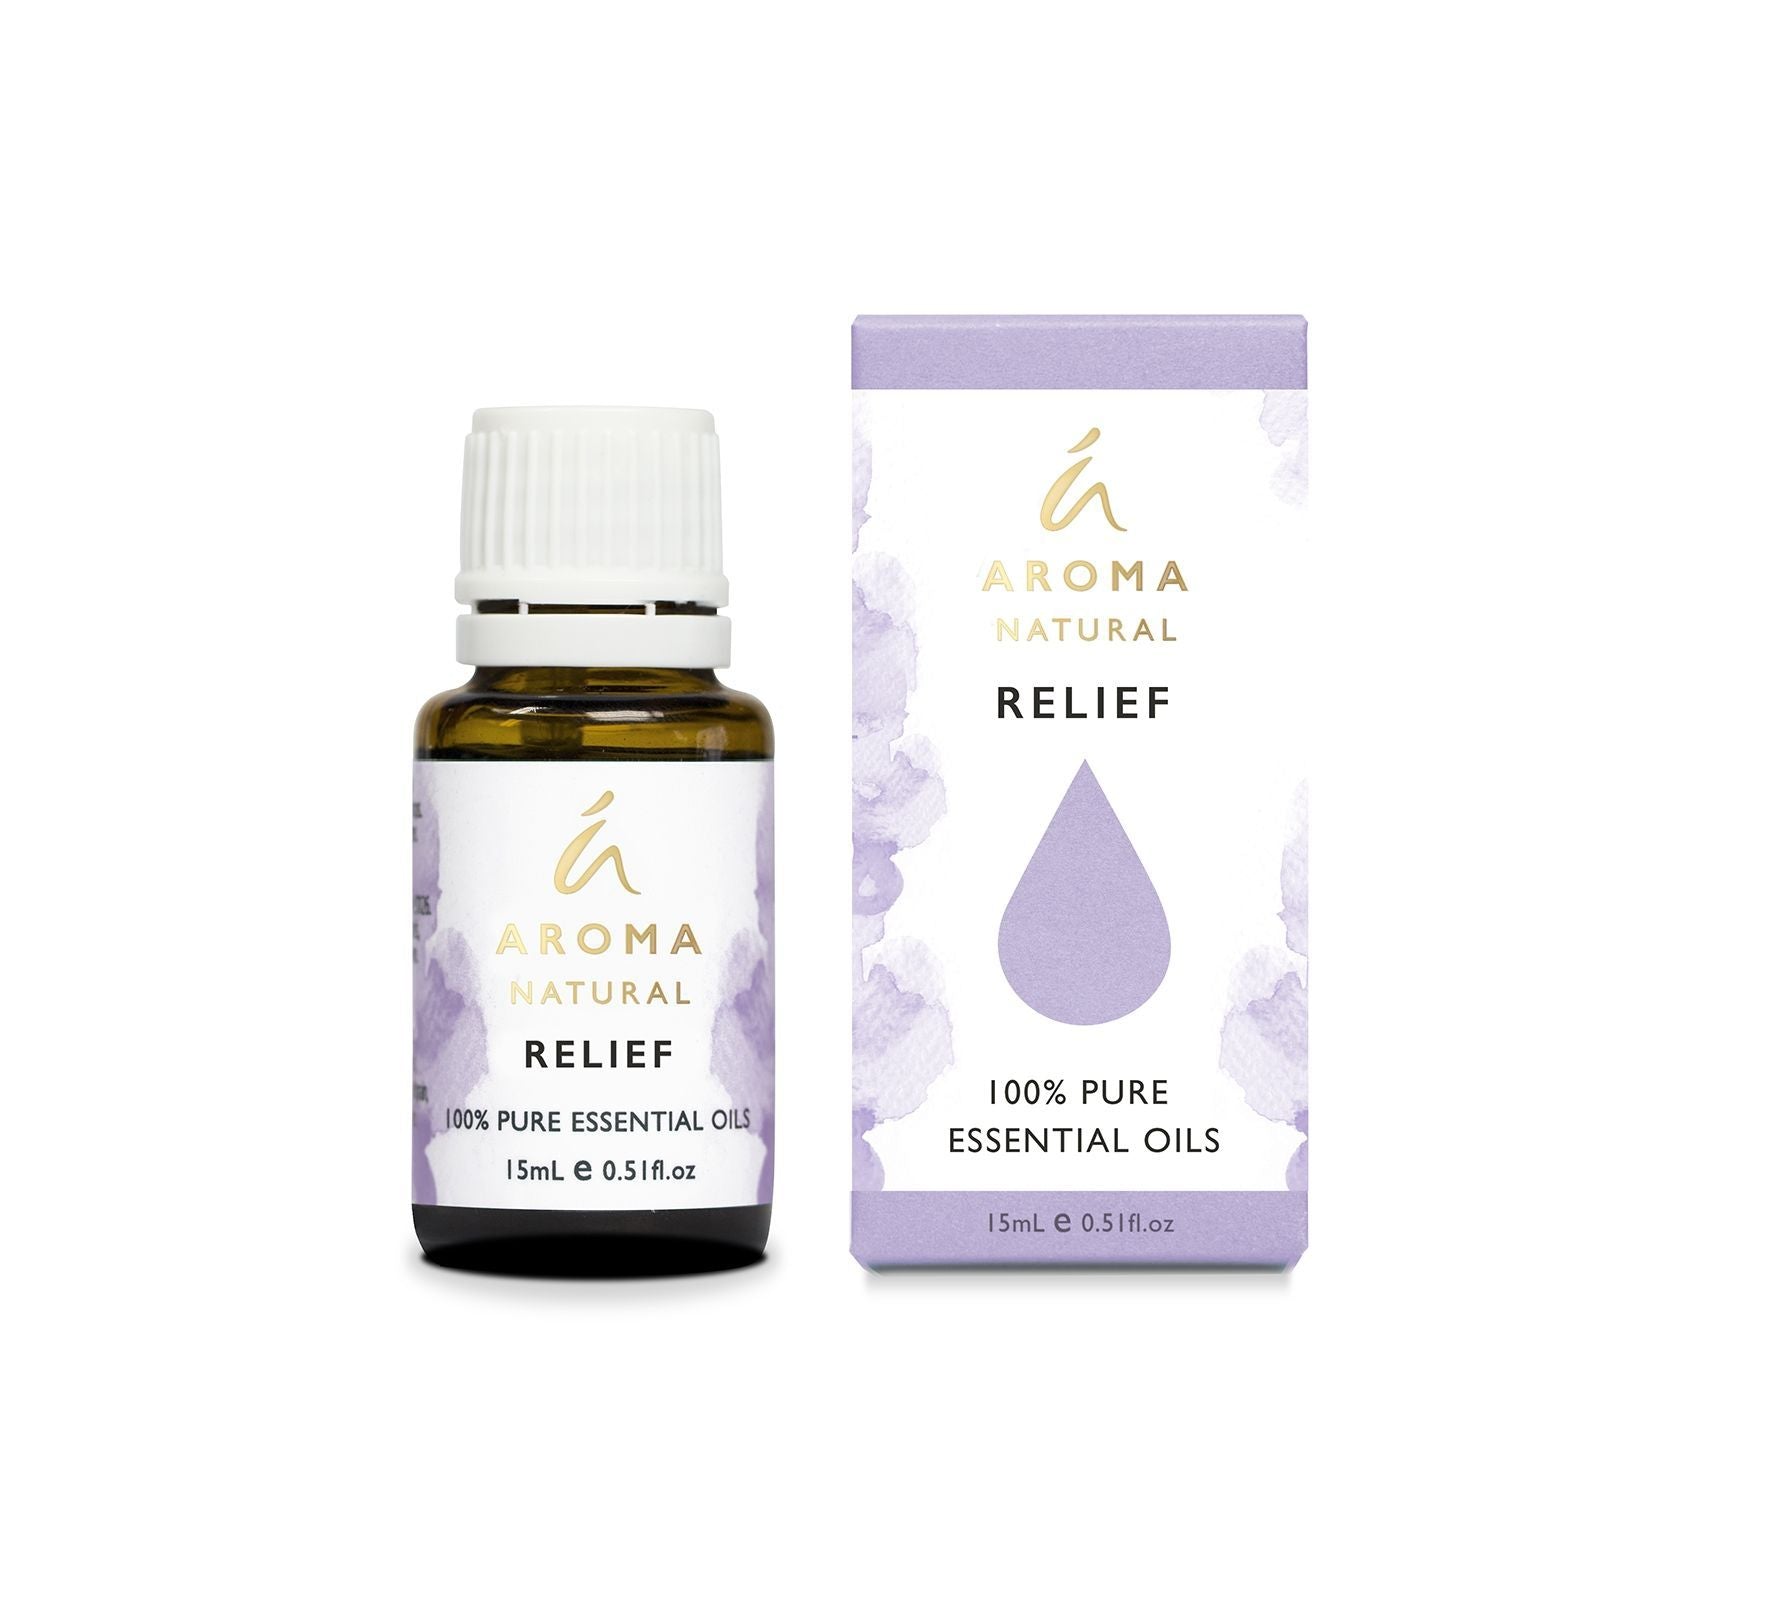 Aroma Natural Essential Oil Blend 15mL - Asst Scents-Candles & Fragrance-Tilley-Relief-The Bay Room